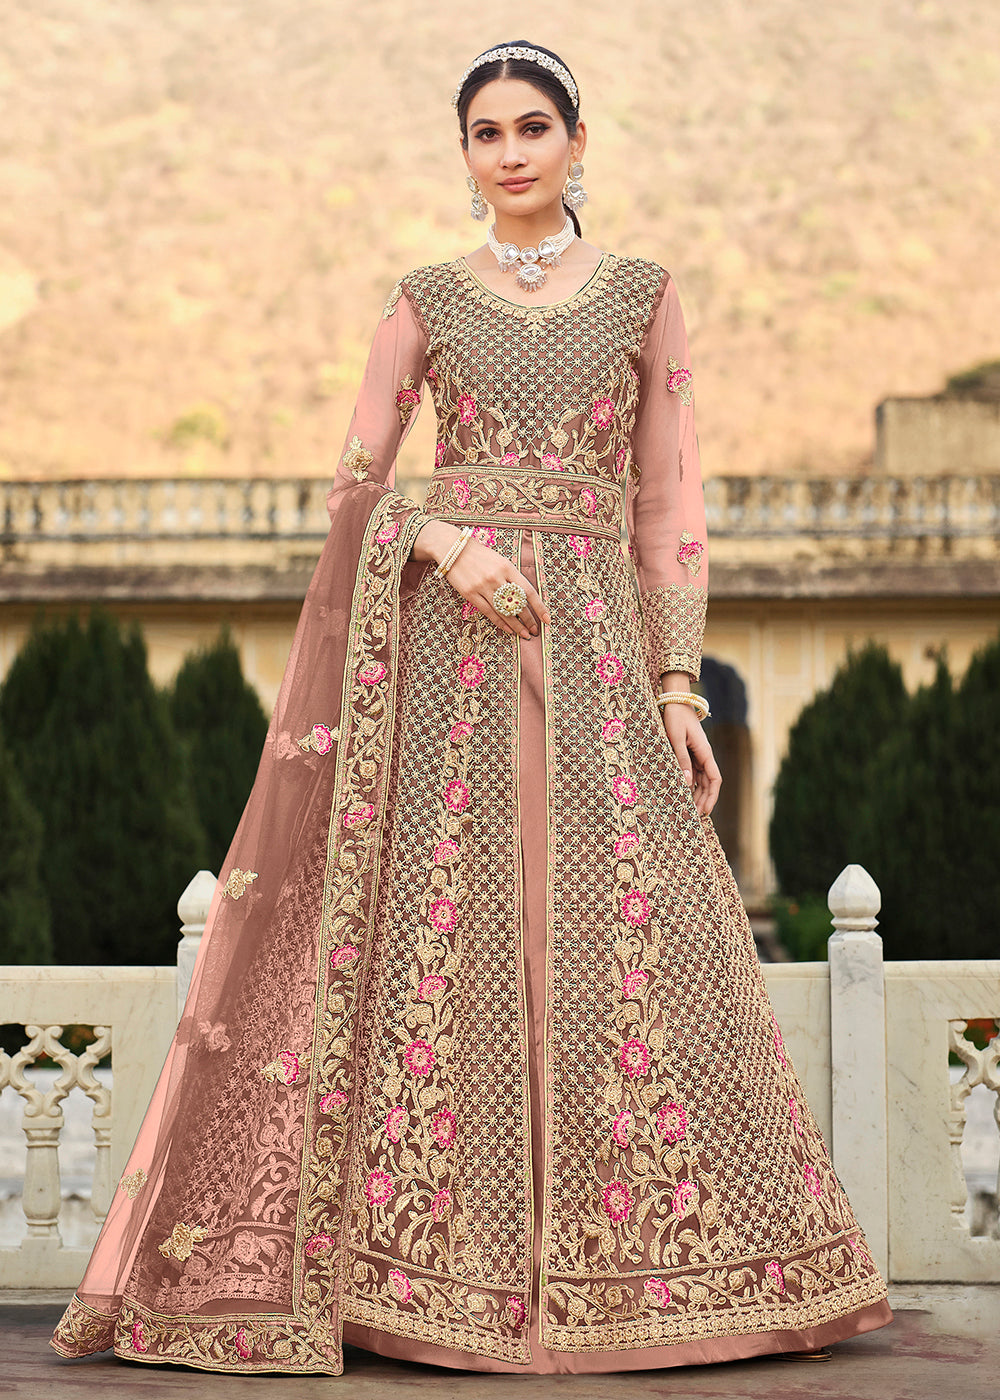 Buy Now Special Cord & Stone Work Rose Pink Slit Style Anarkali Suit Online in USA, UK, Australia, New Zealand, Canada, Italy & Worldwide at Empress Clothing. 